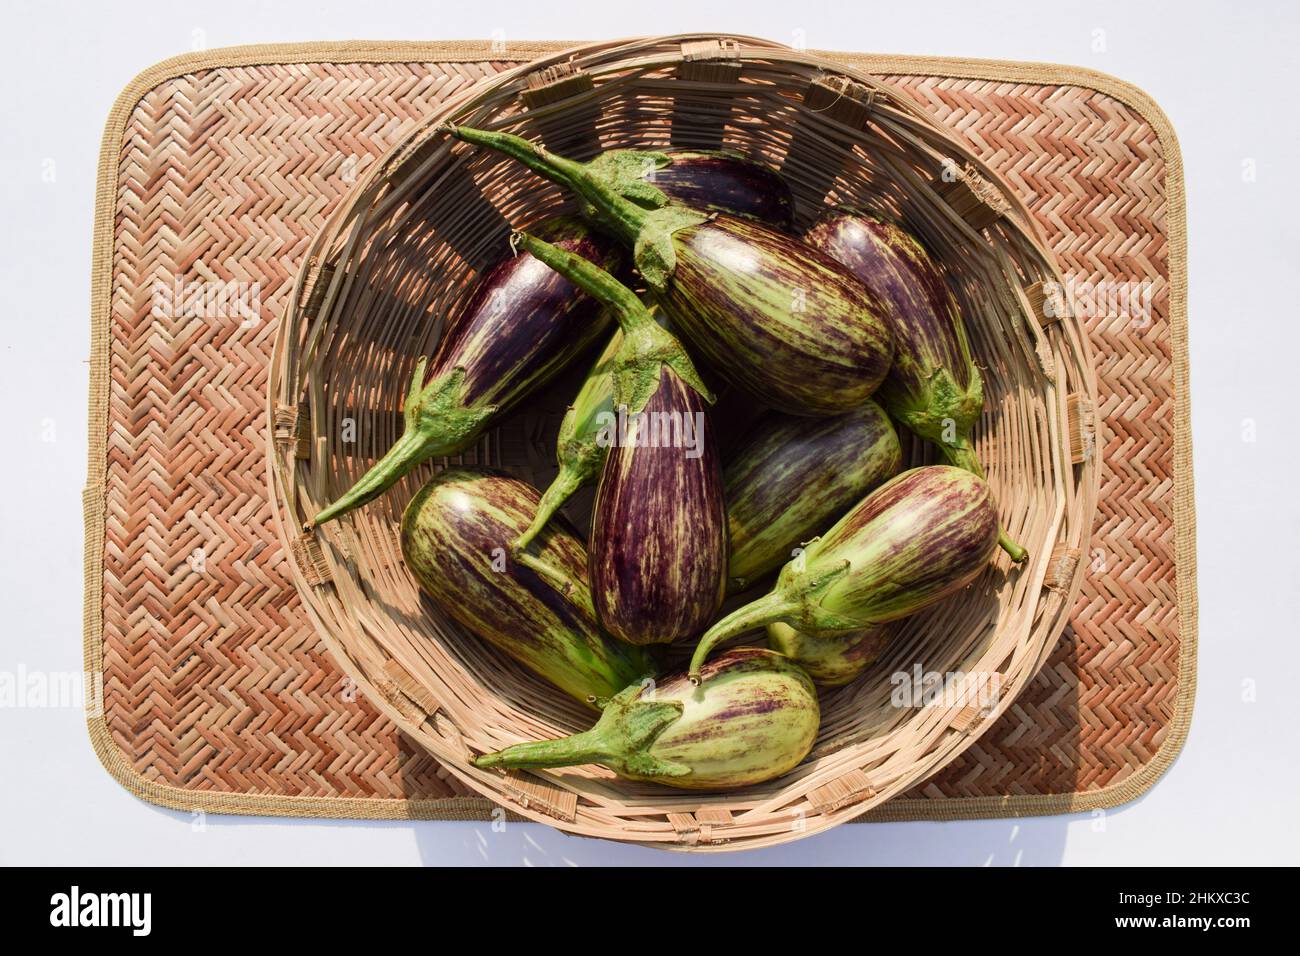 Purple and green striped dua coloured Brinjals in basket. Aubergine or Eggplant vegetable from South Asian India Gujarat. Stock Photo